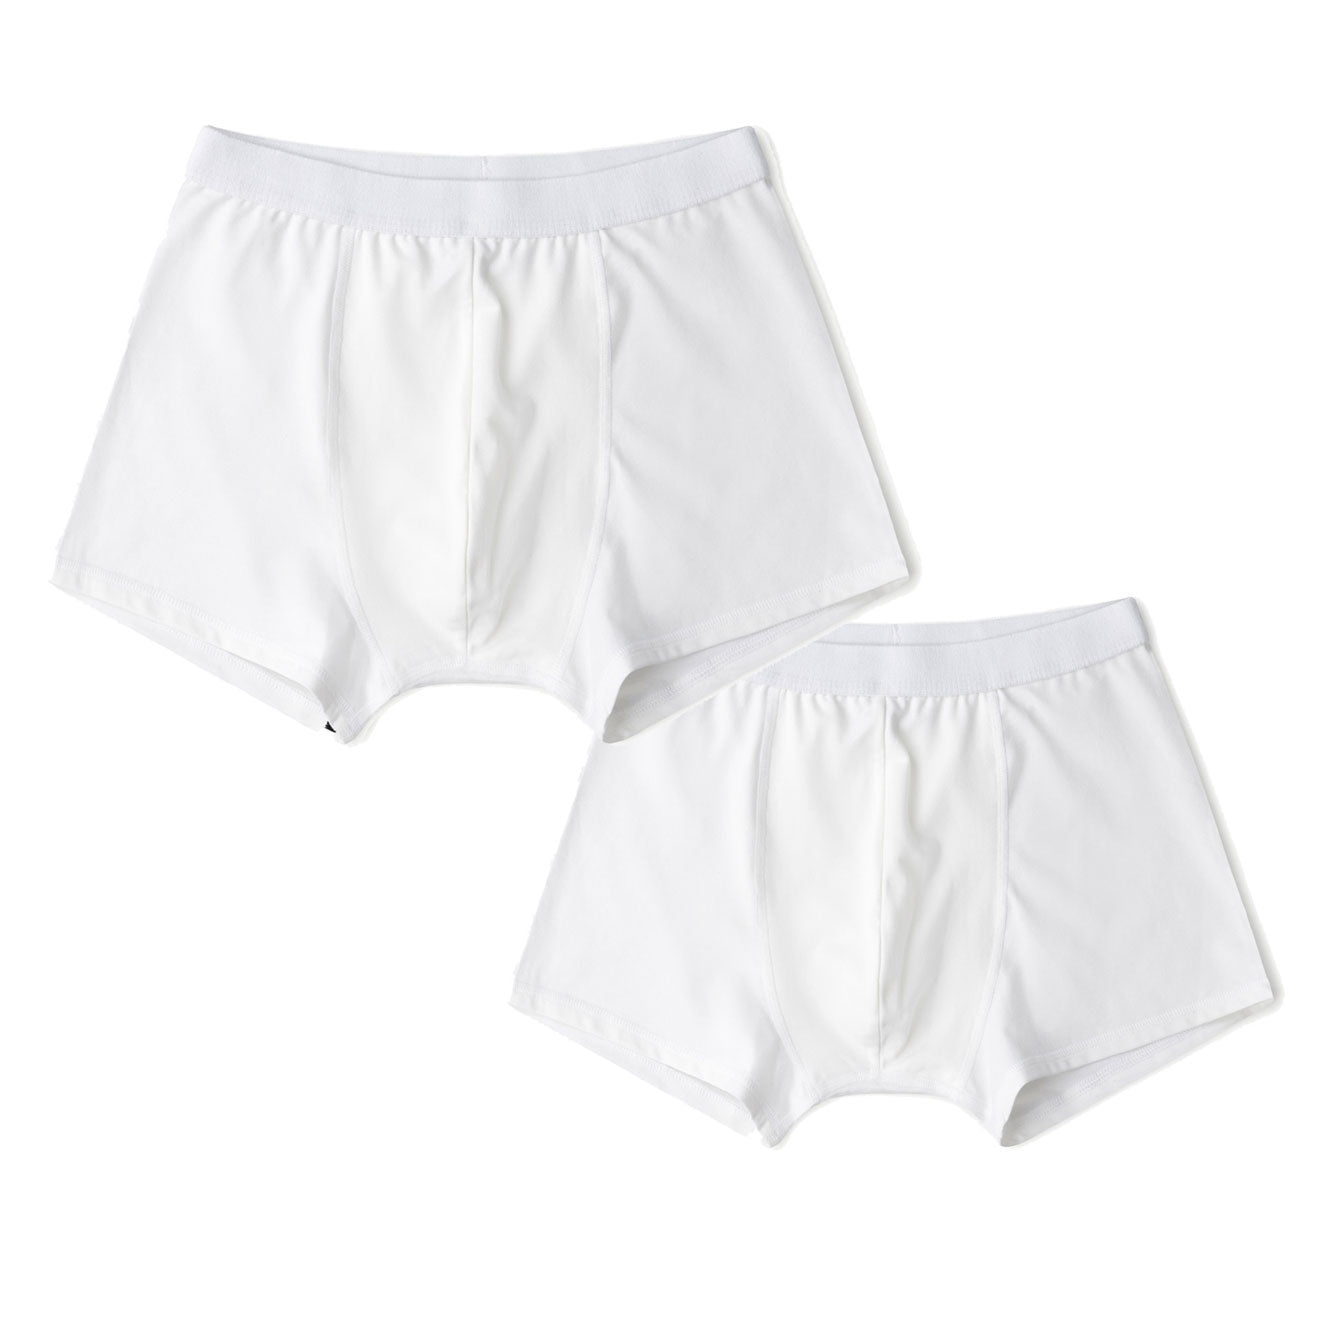 White Organic & Recycled cotton Boxer Briefs, first fit promise 2 pack